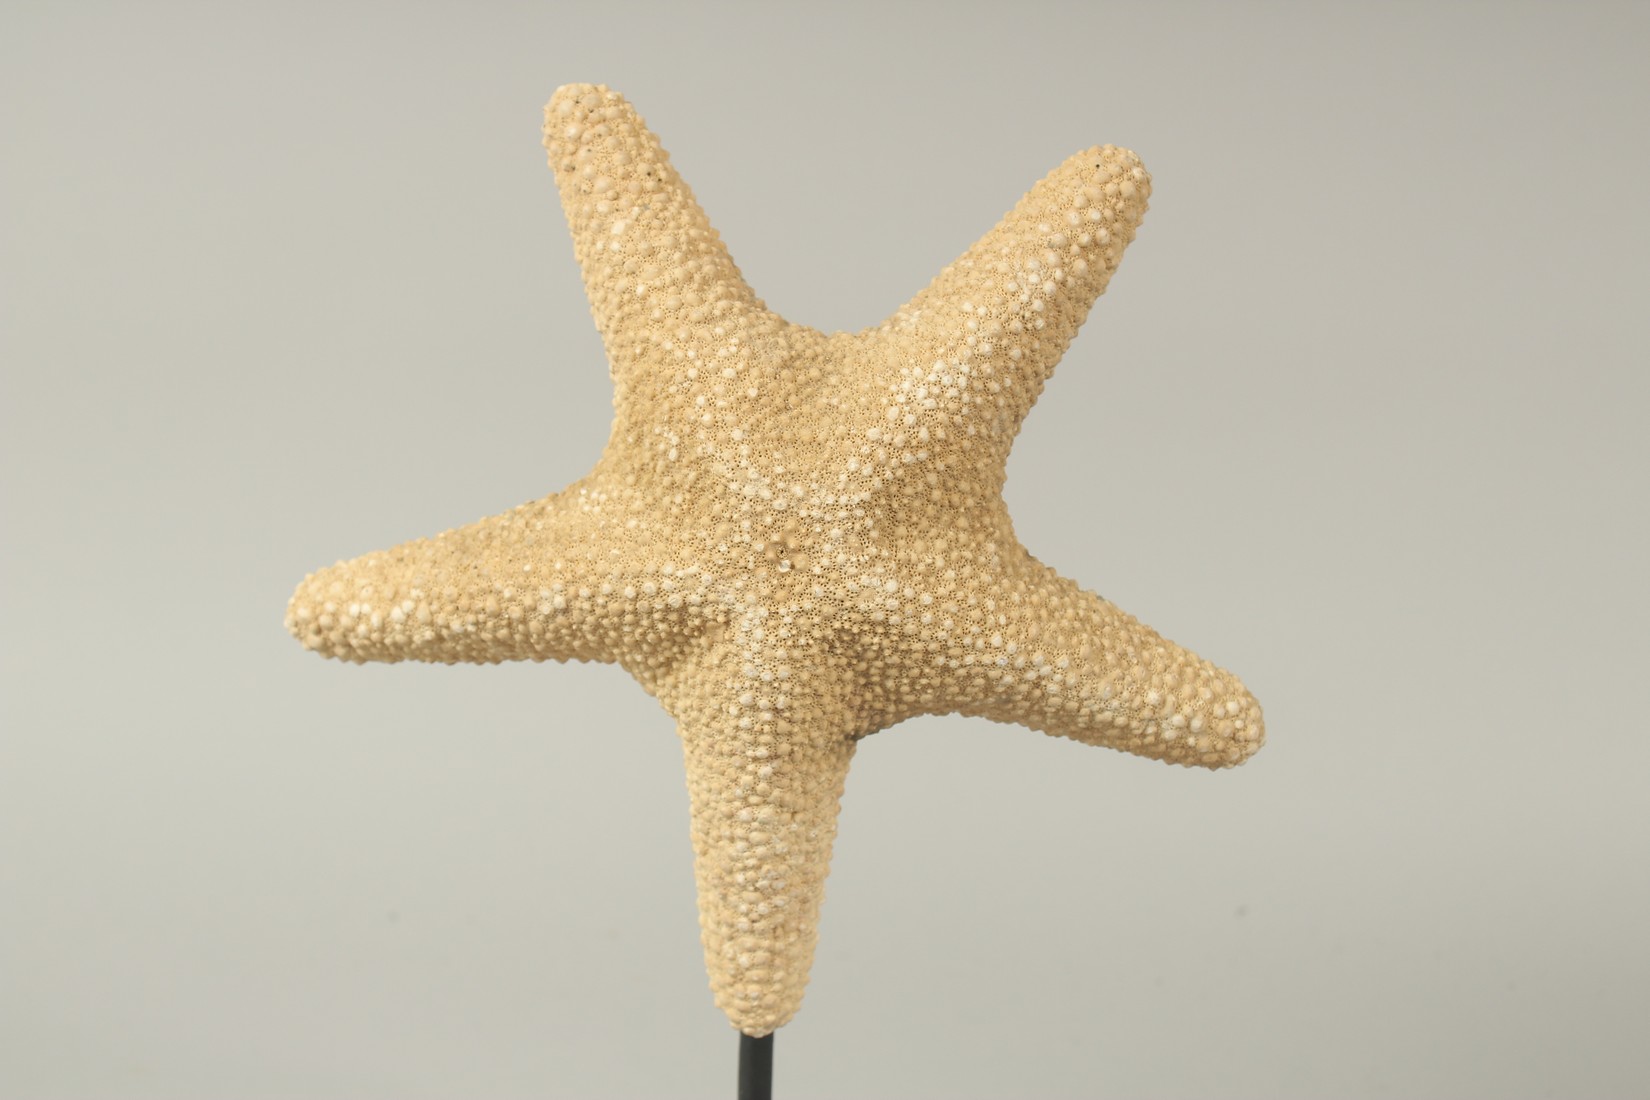 A STAR FISH SPECIMEN on a stand. - Image 2 of 3